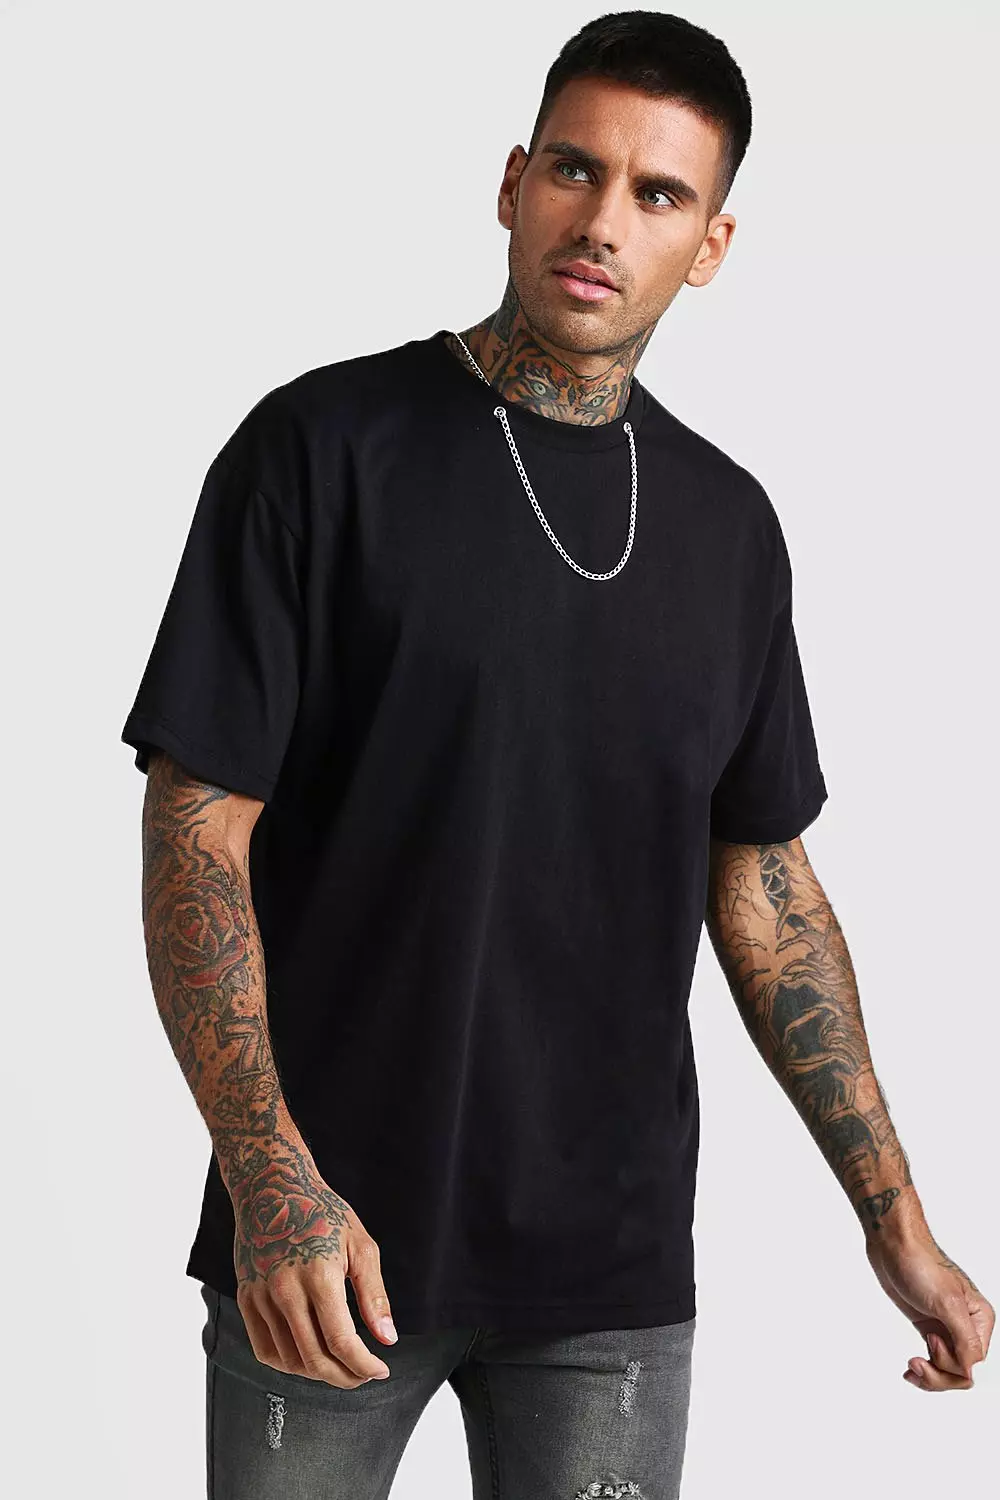 Huddle Goodwill afskaffet Loose Fit T-Shirt With Chain Necklace | boohooMAN USA